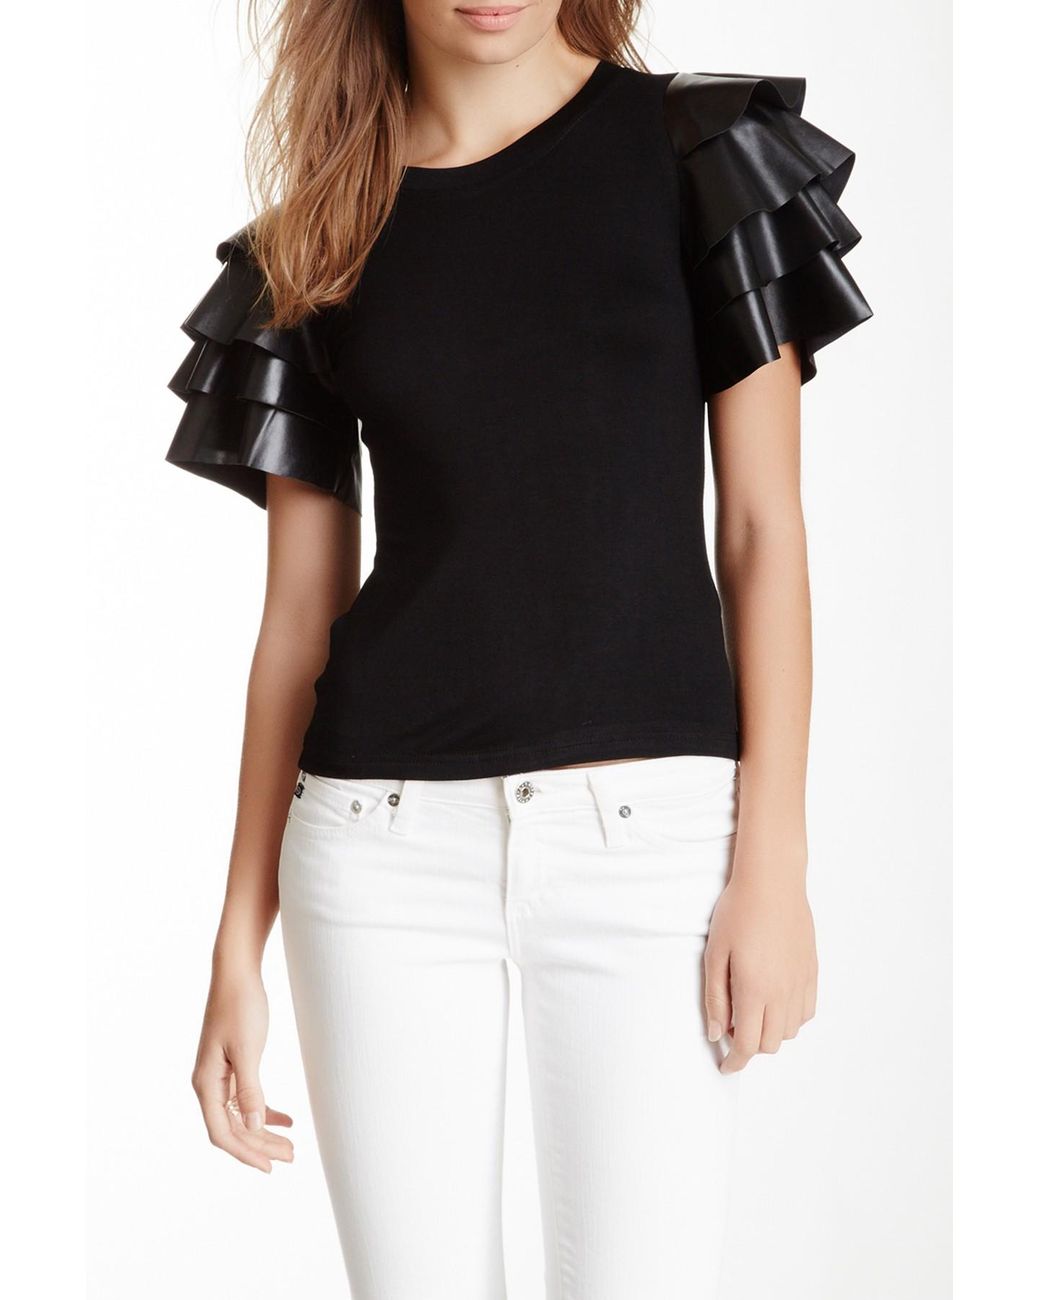 Gracia Ruffled Faux Leather Sleeve Top in Black | Lyst